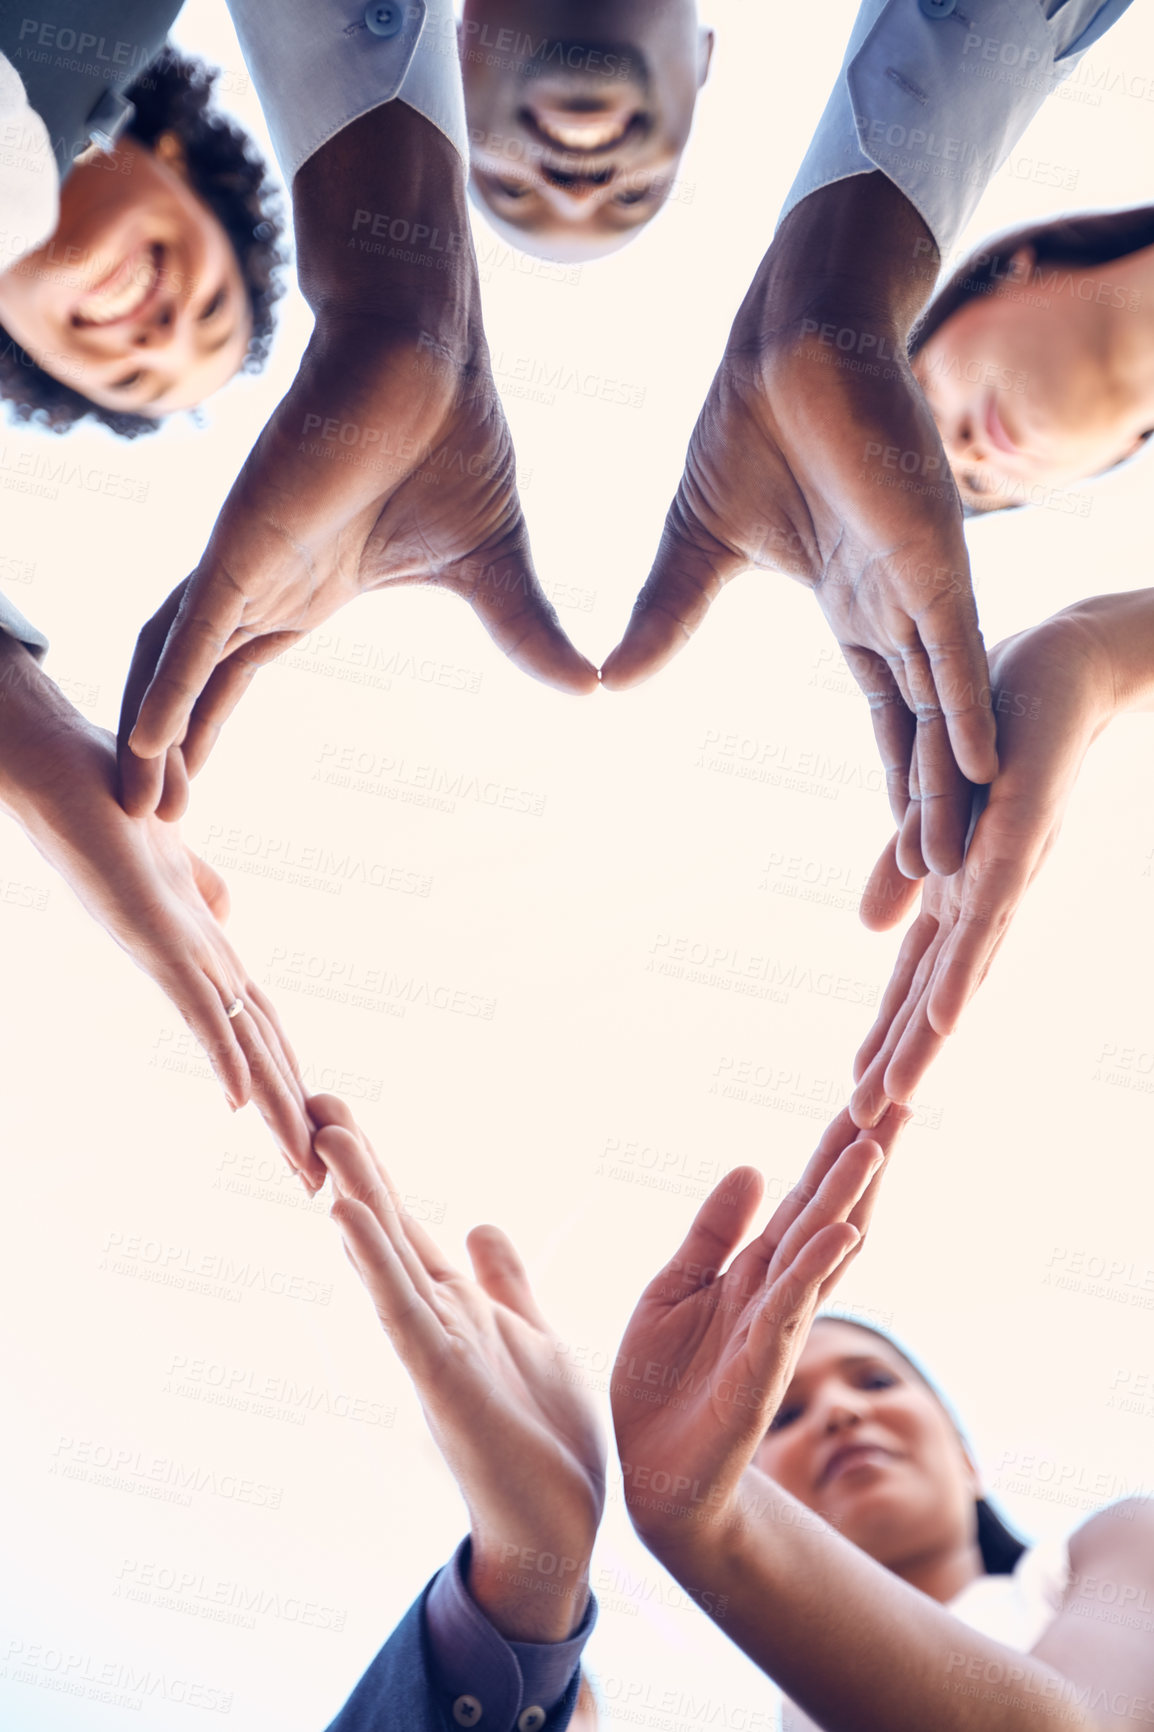 Buy stock photo Closeup shot of a group of unrecognizable businesspeople making a heart shape with their hands outdoors